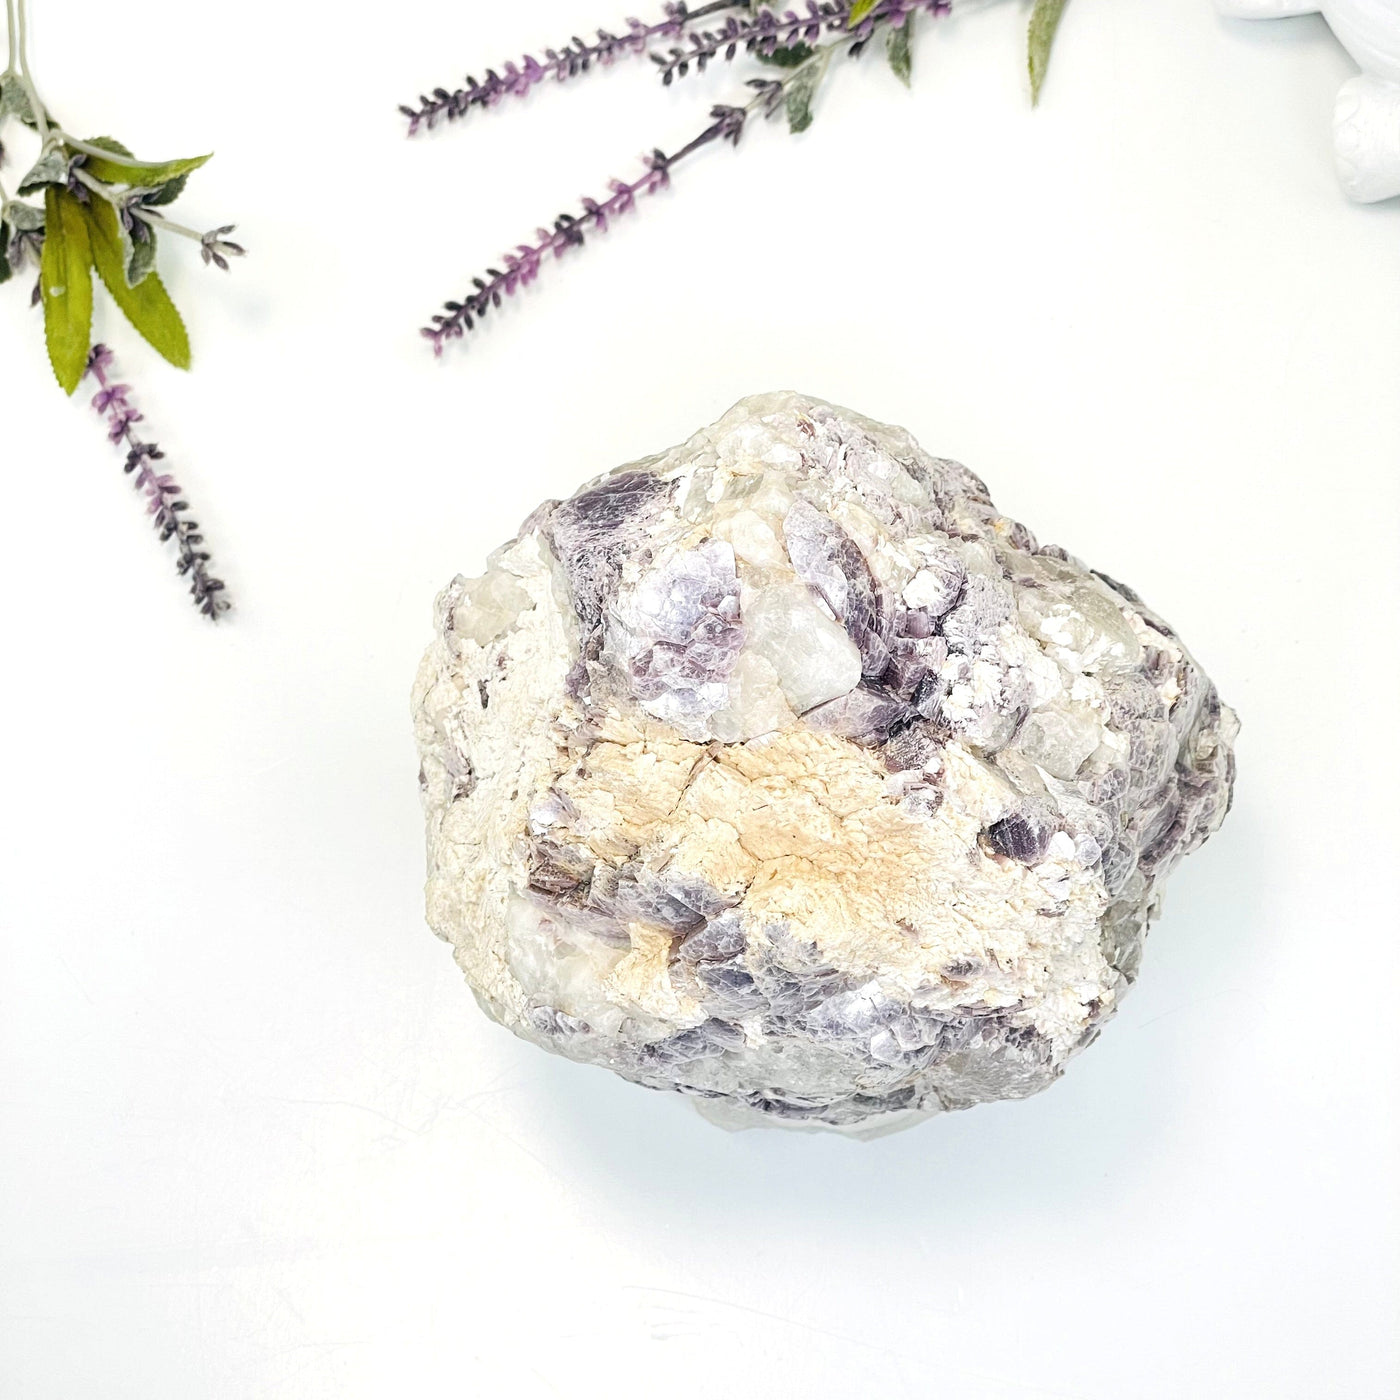 A top view of the beautiful Lepidolite Mica Quartz on white background